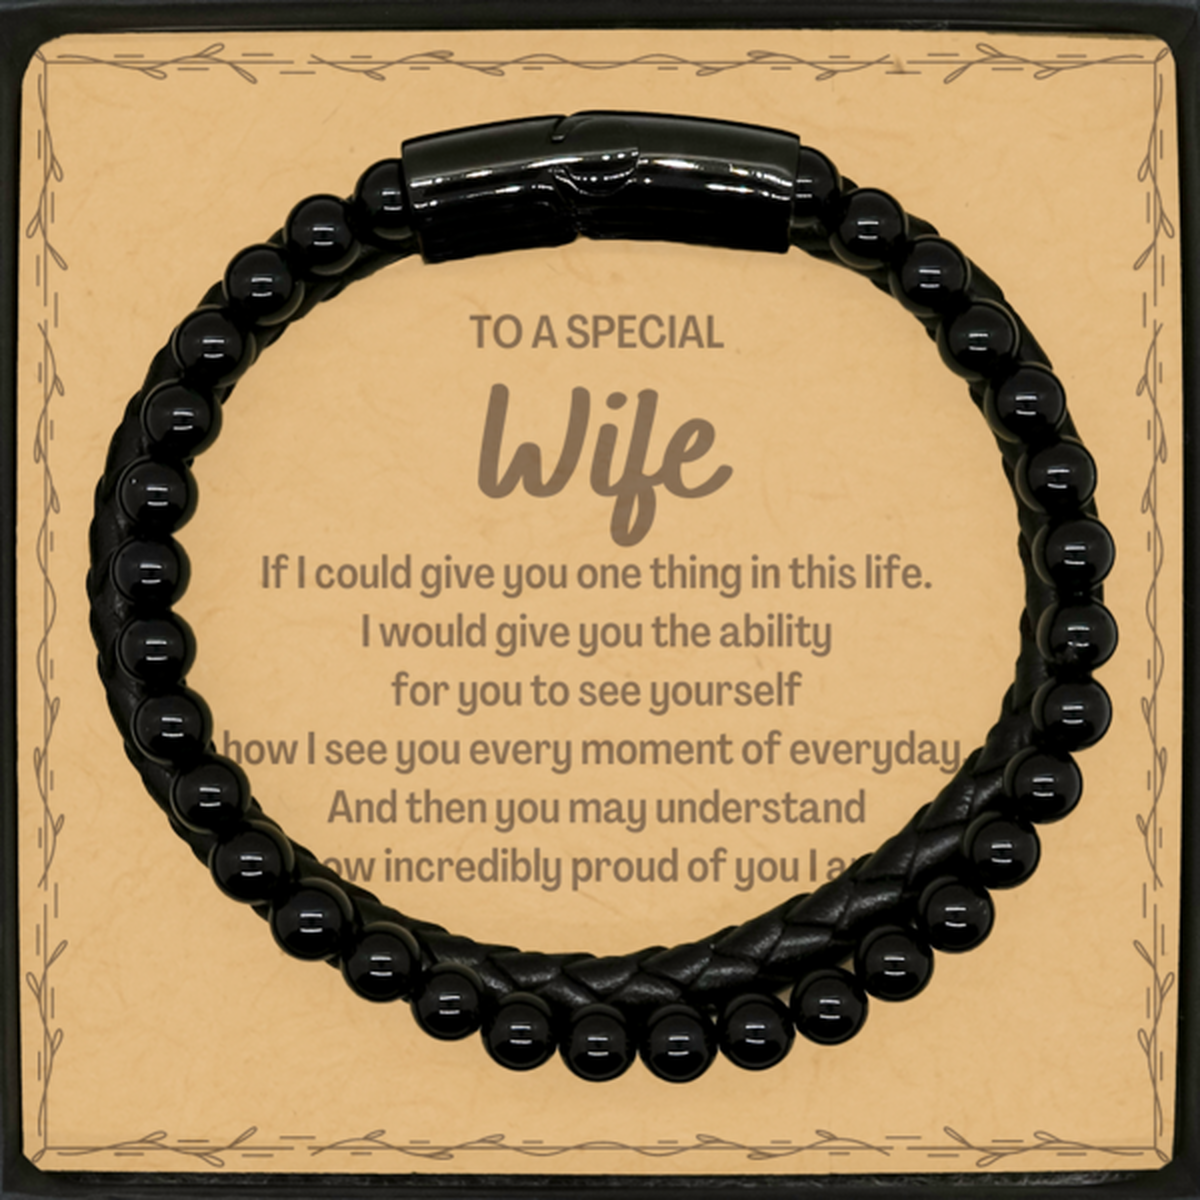 To My Wife Stone Leather Bracelets, Gifts For Wife Message Card, Inspirational Gifts for Christmas Birthday, Epic Gifts for Wife To A Special Wife how incredibly proud of you I am